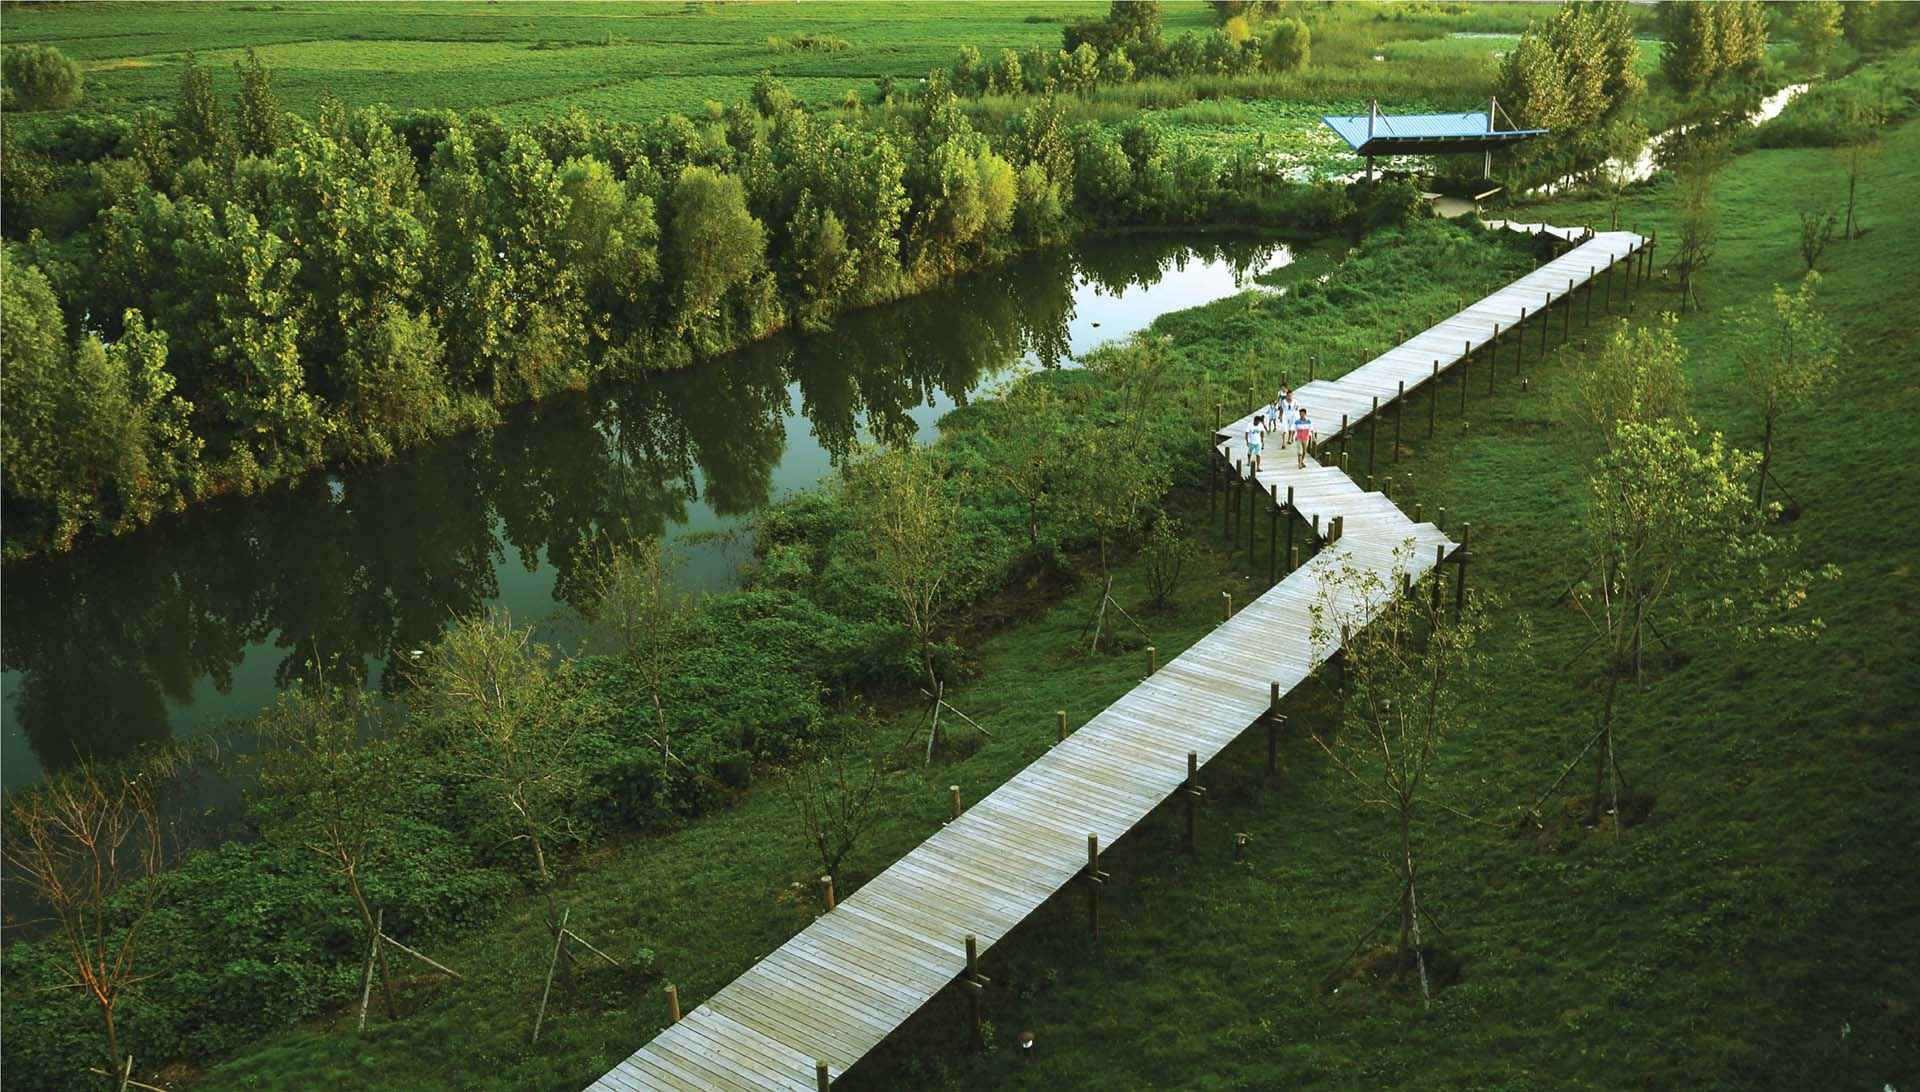 a walkway by a river in the countryside